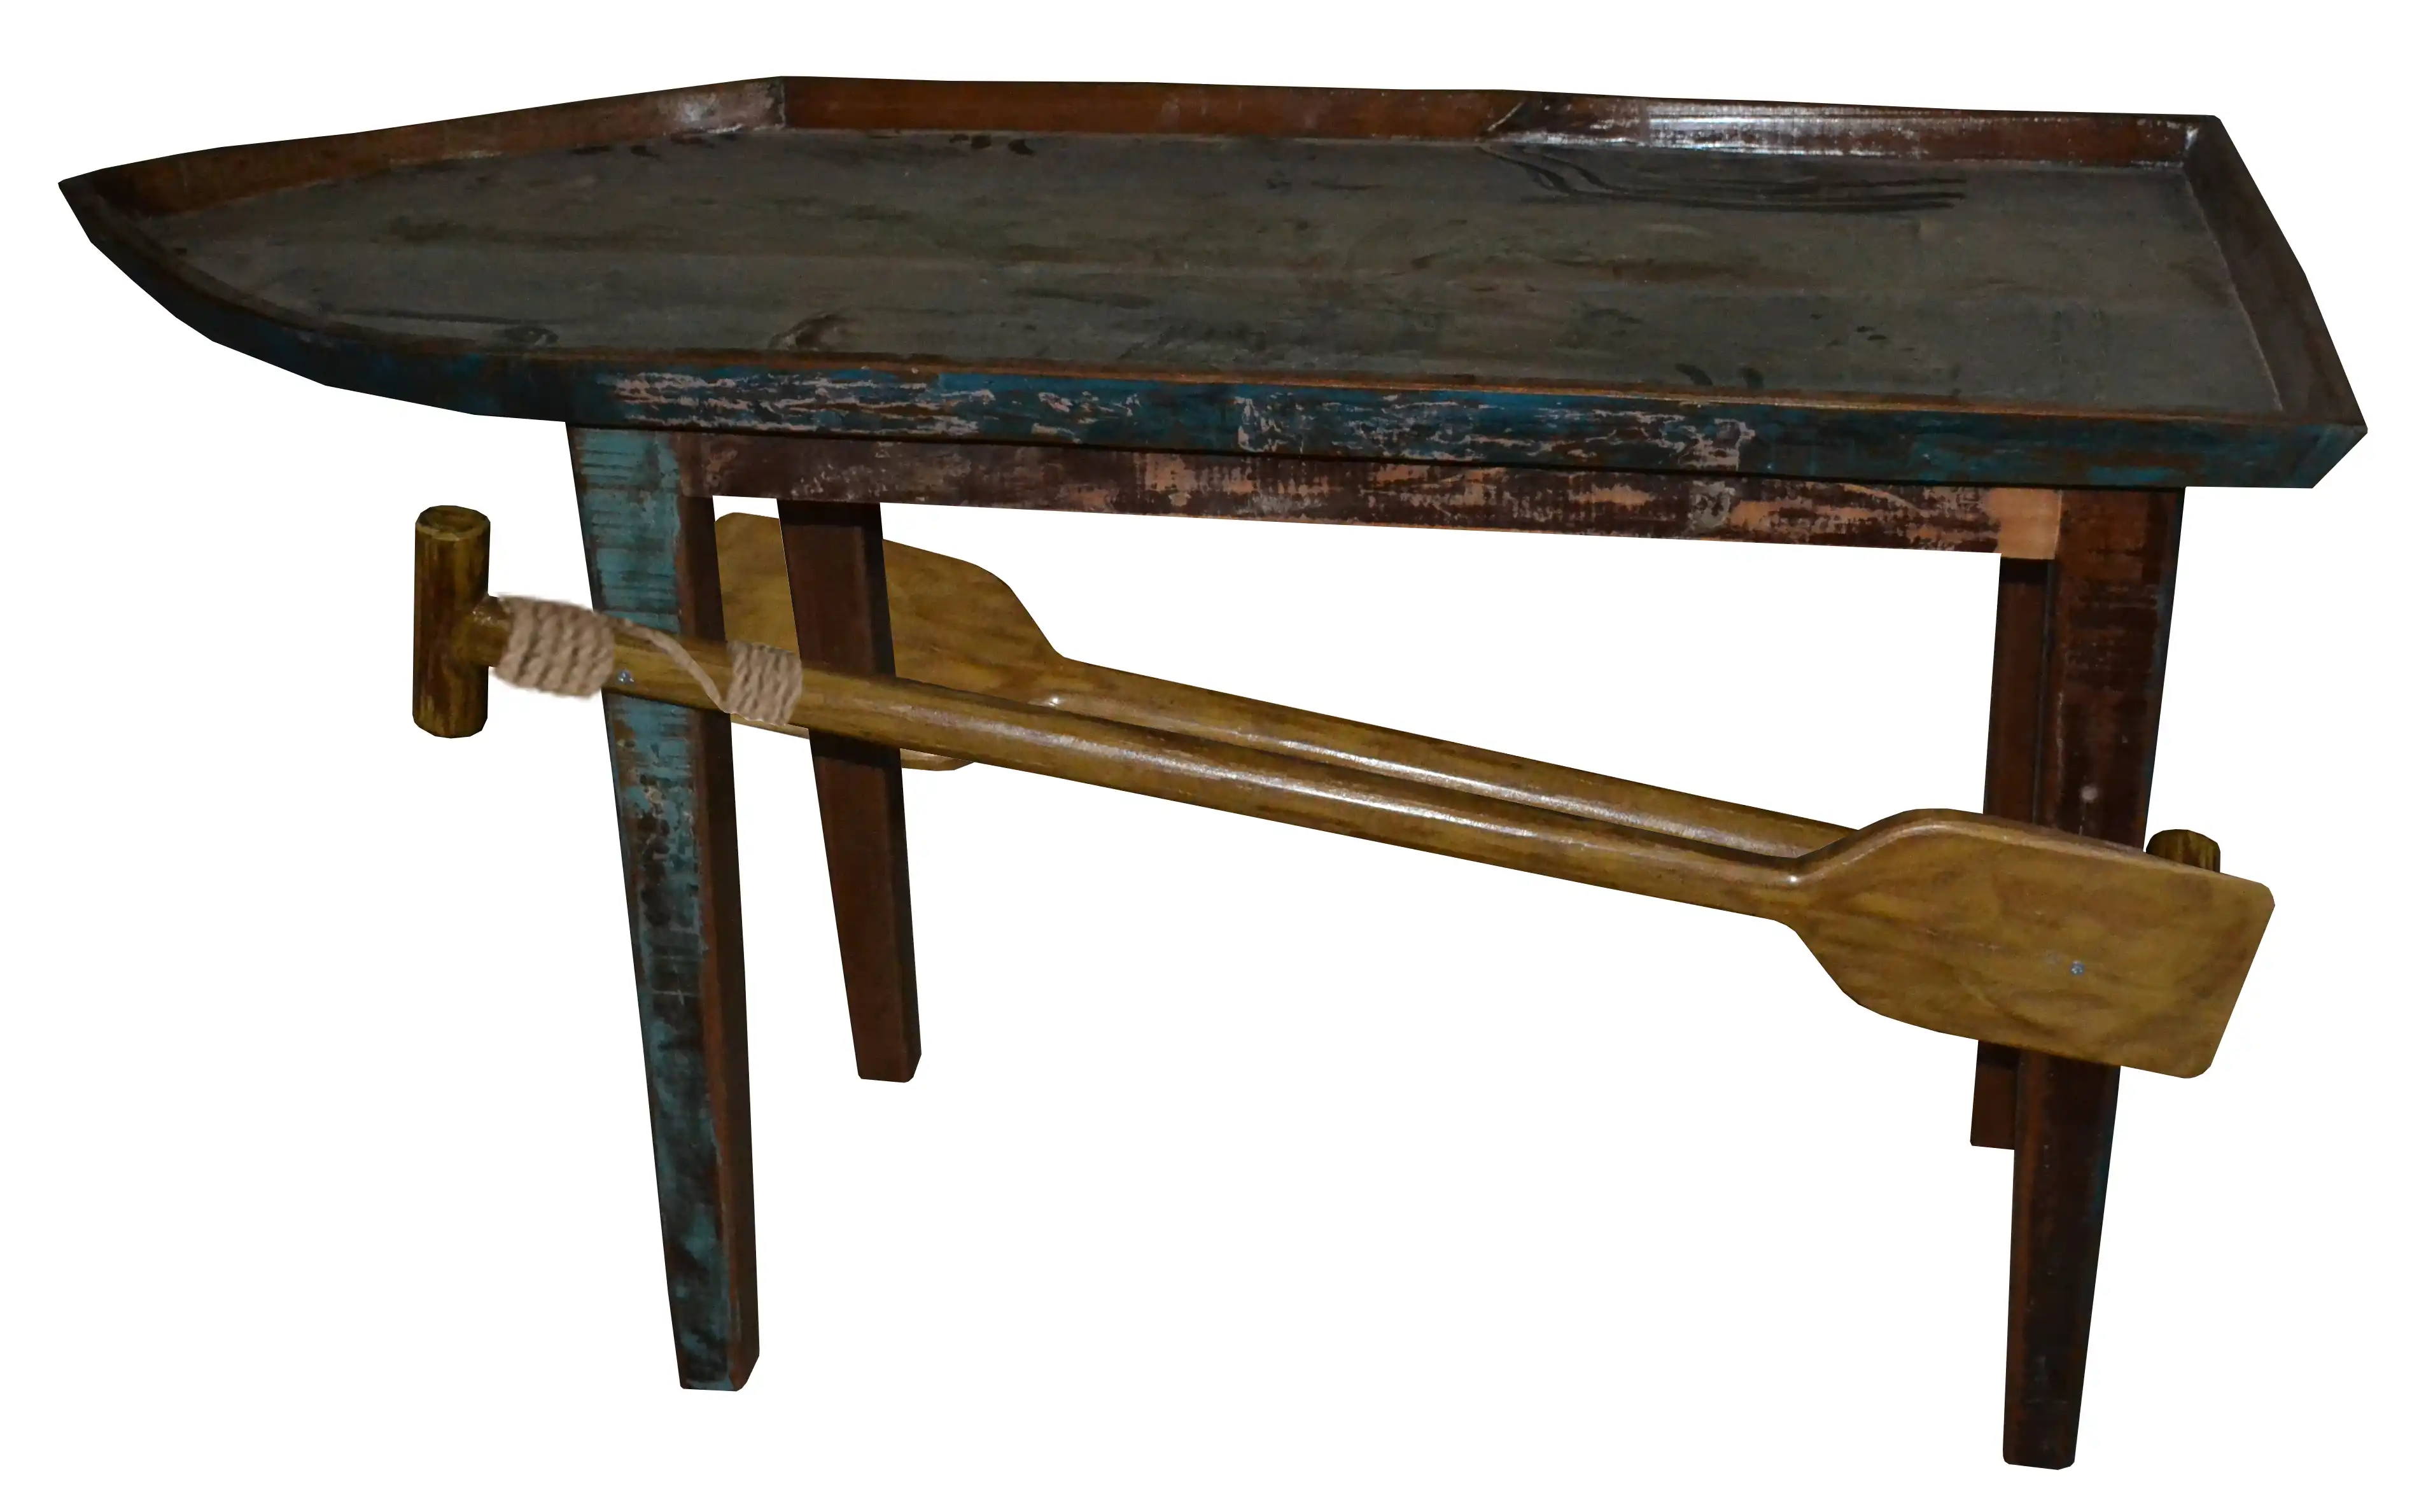 Reclaimed Wood Boat-Shaped Console Table (Knock Down) - popular handicrafts